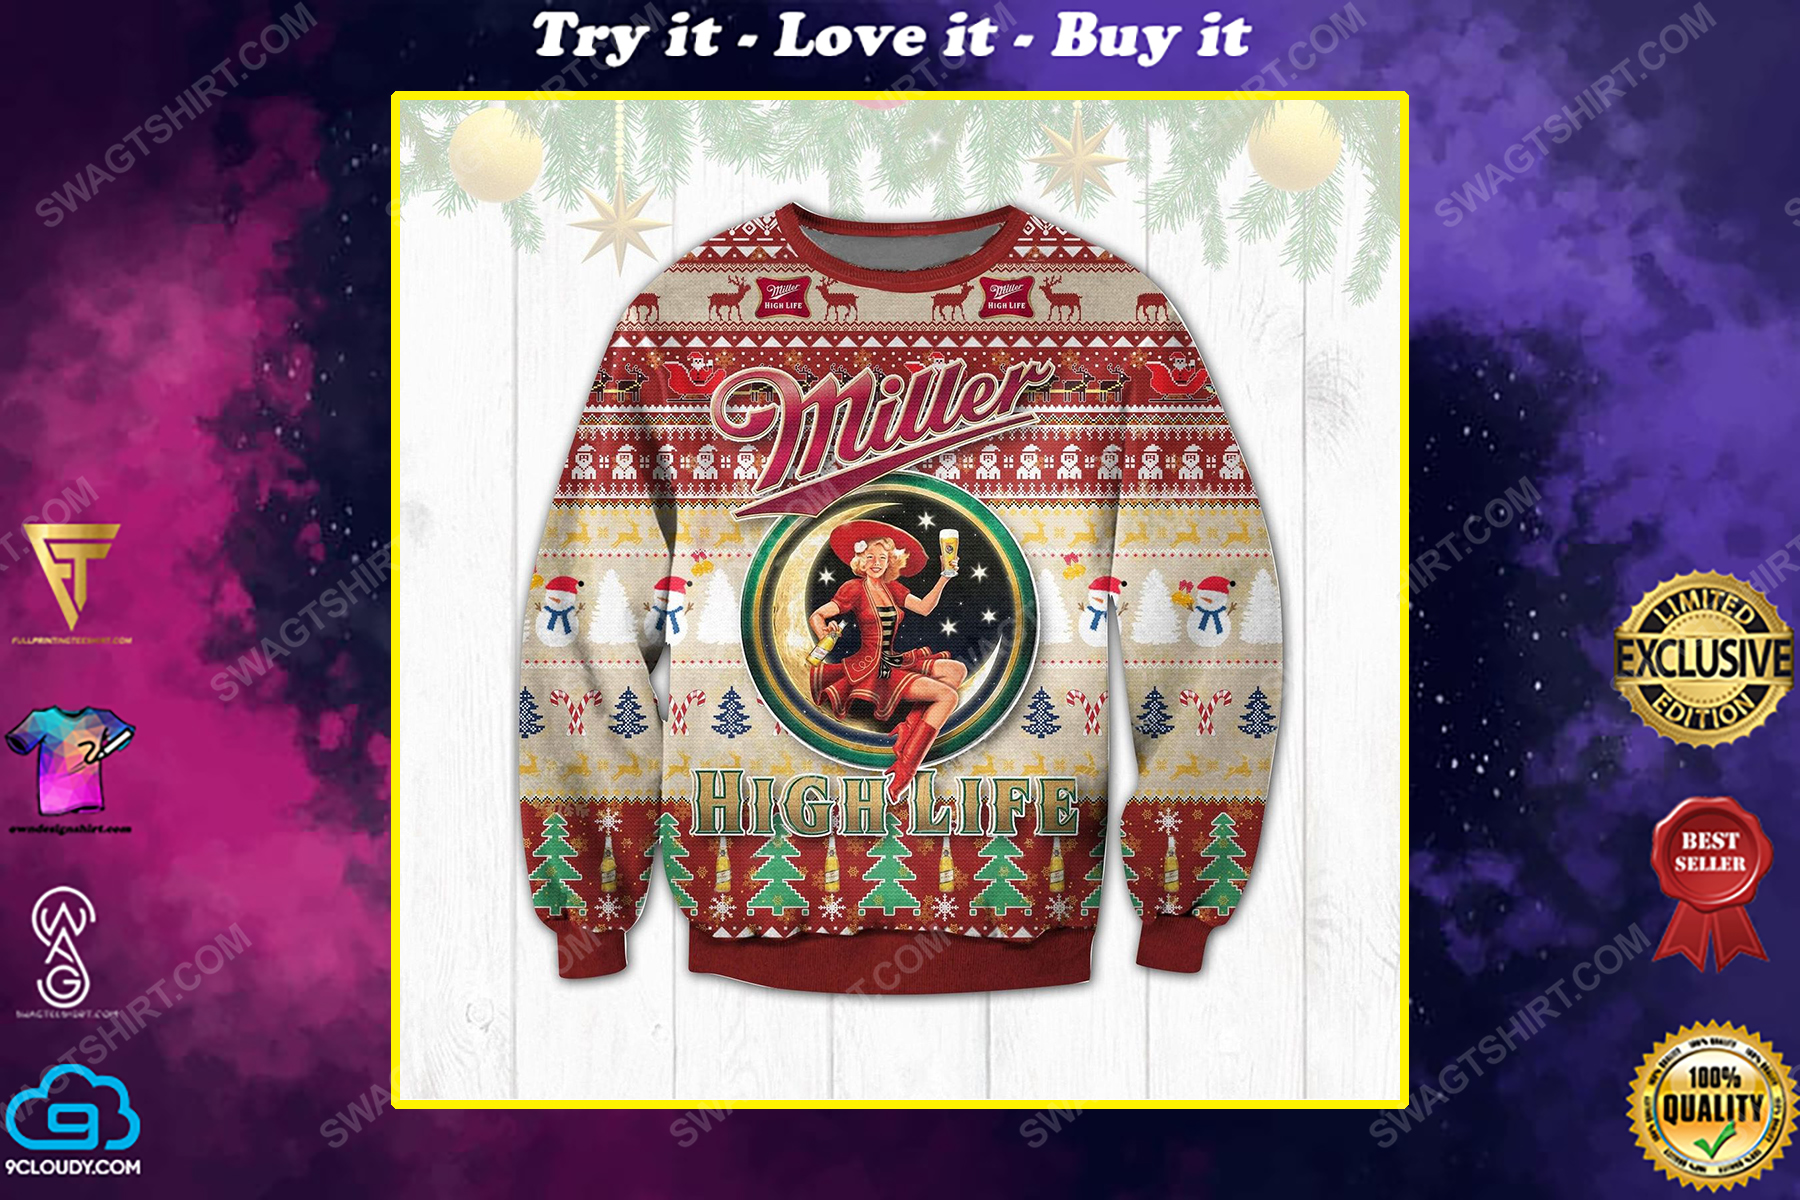 Miller high life beer ugly christmas sweater